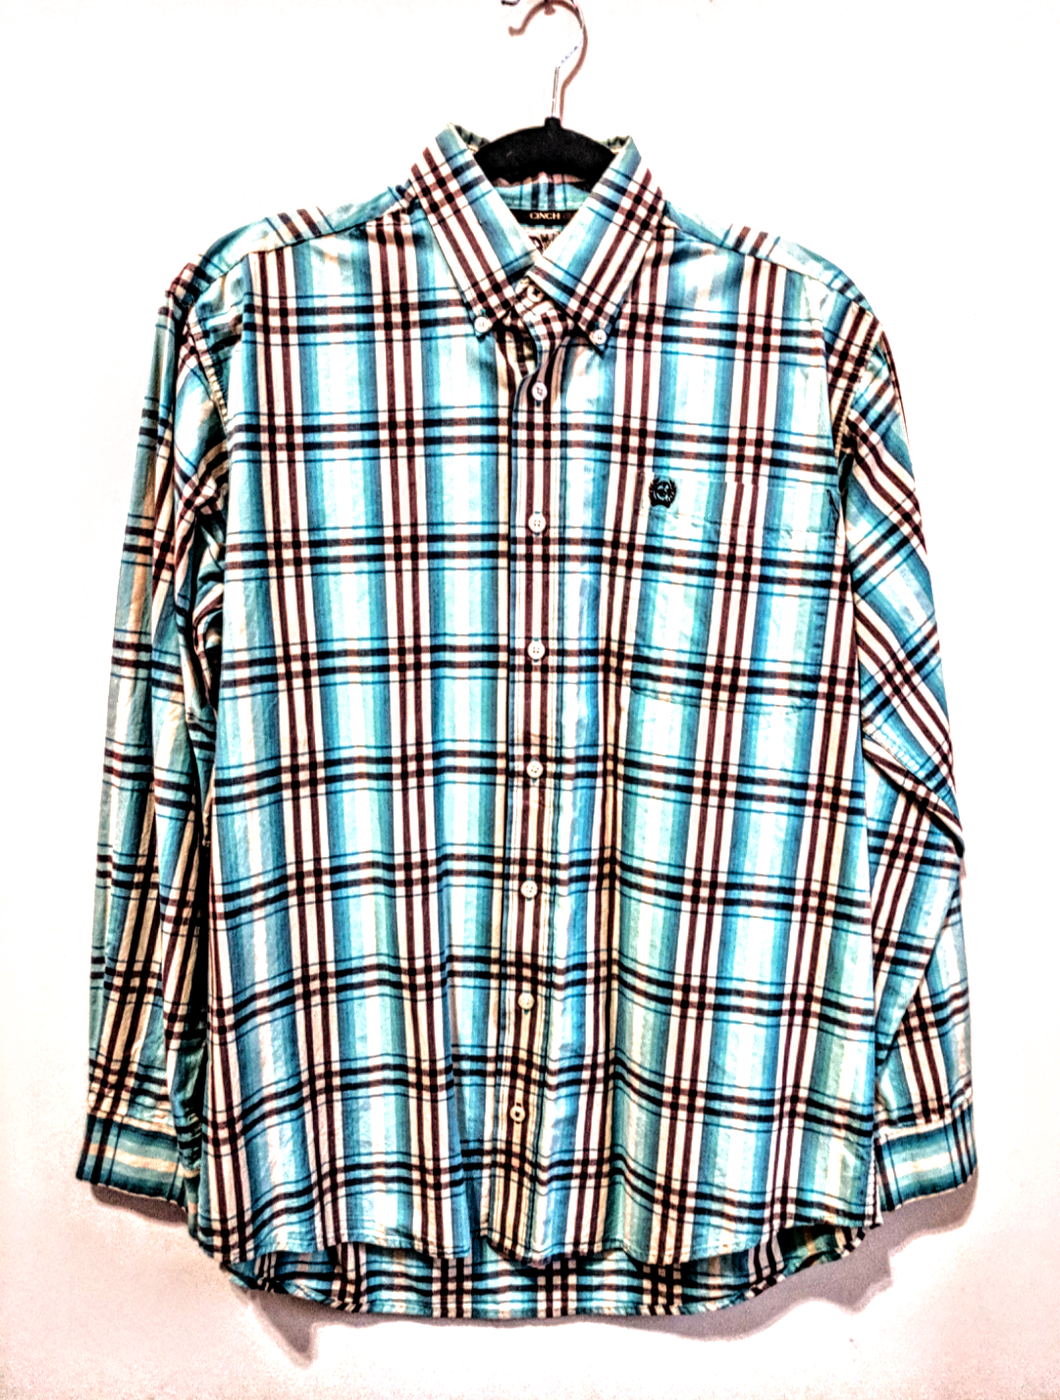 Cinch turquoise/chocolate Plaid size small New without the tags